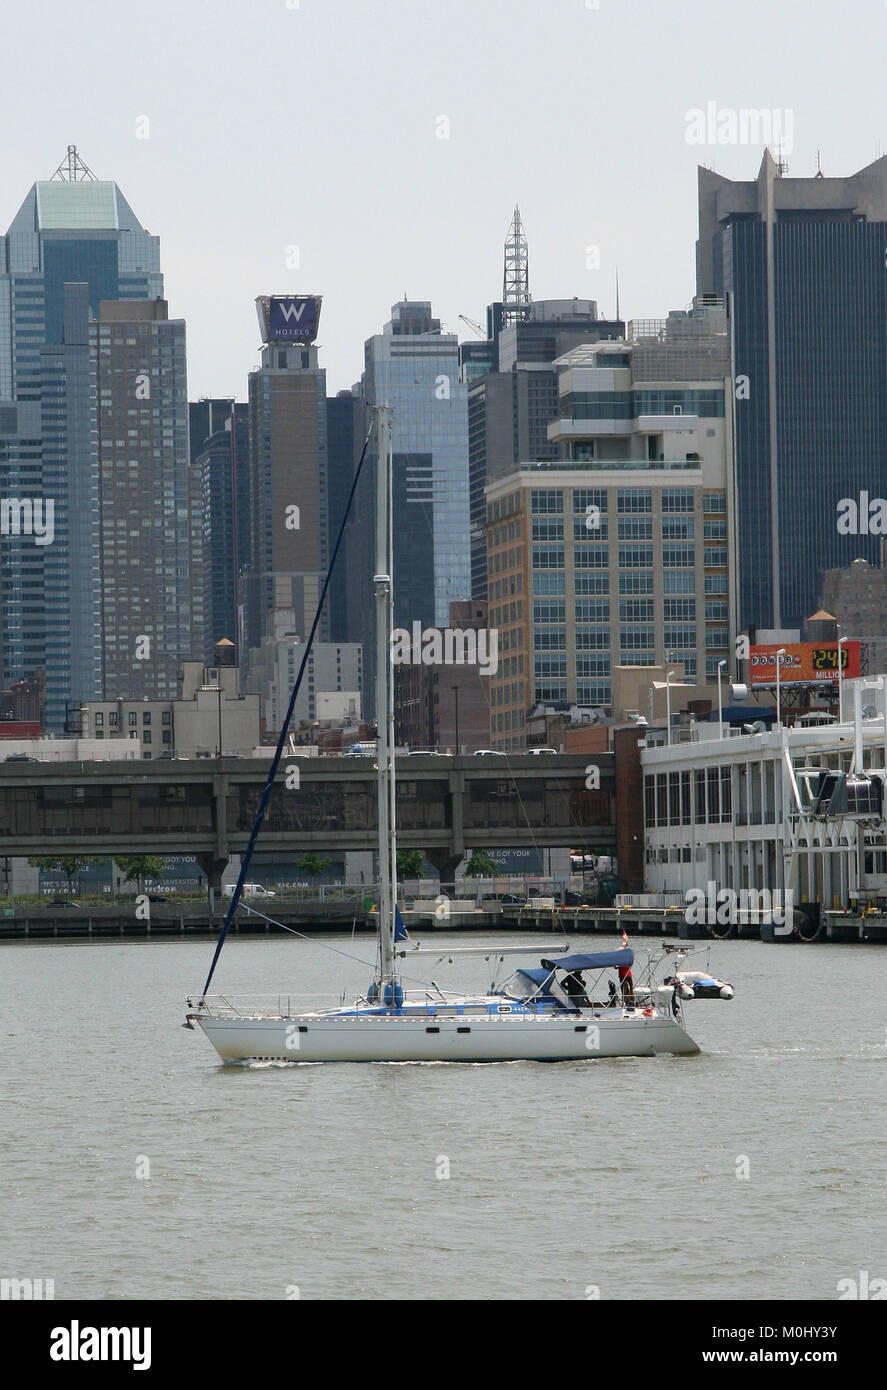 Three men on a small yacht in front of buildings on the Hudson River, Midtown West Manhattan, New York City, New York State, USA. Stock Photo